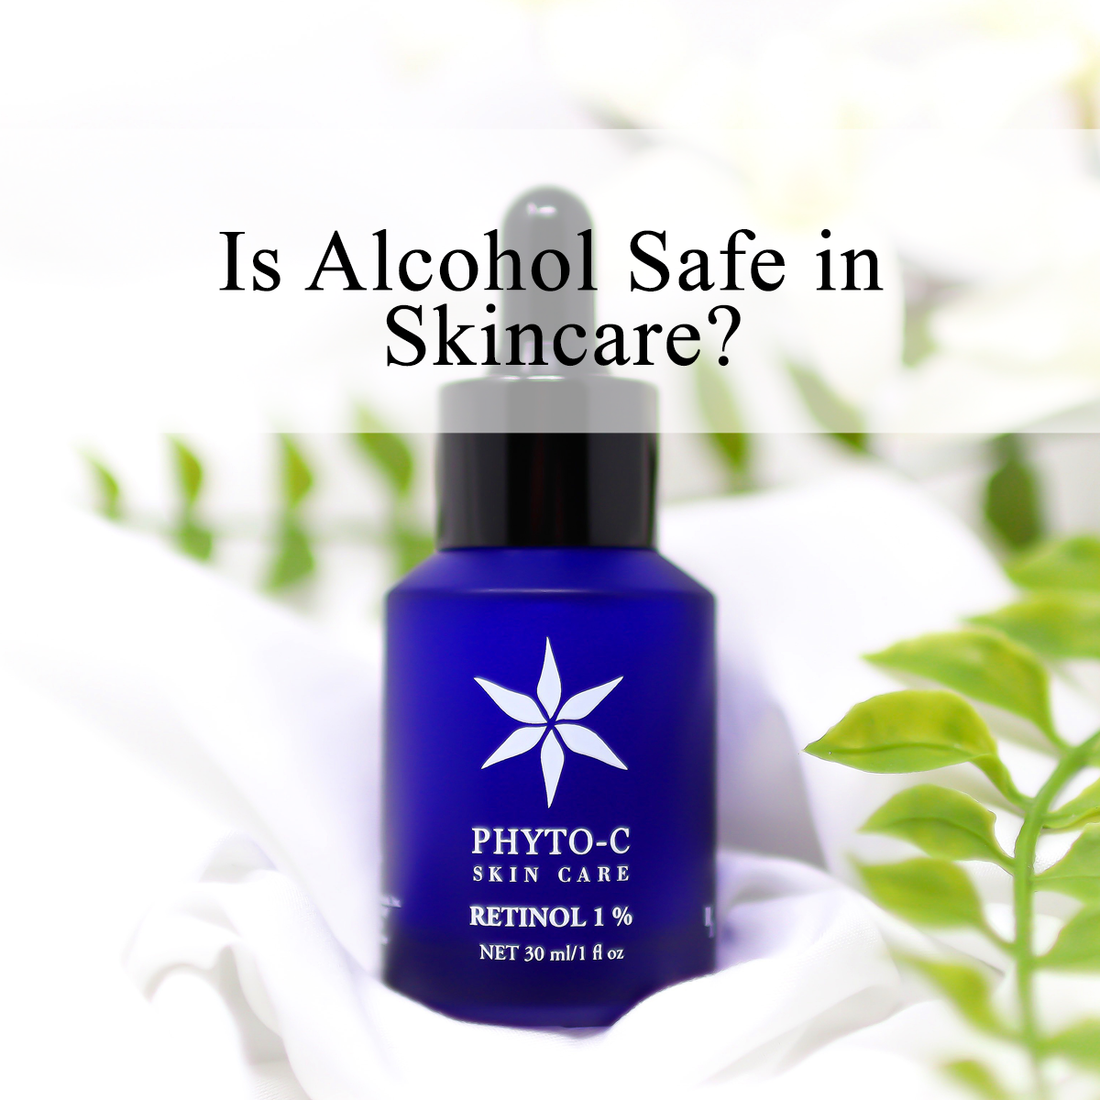 Is Alcohol Safe in Skincare?